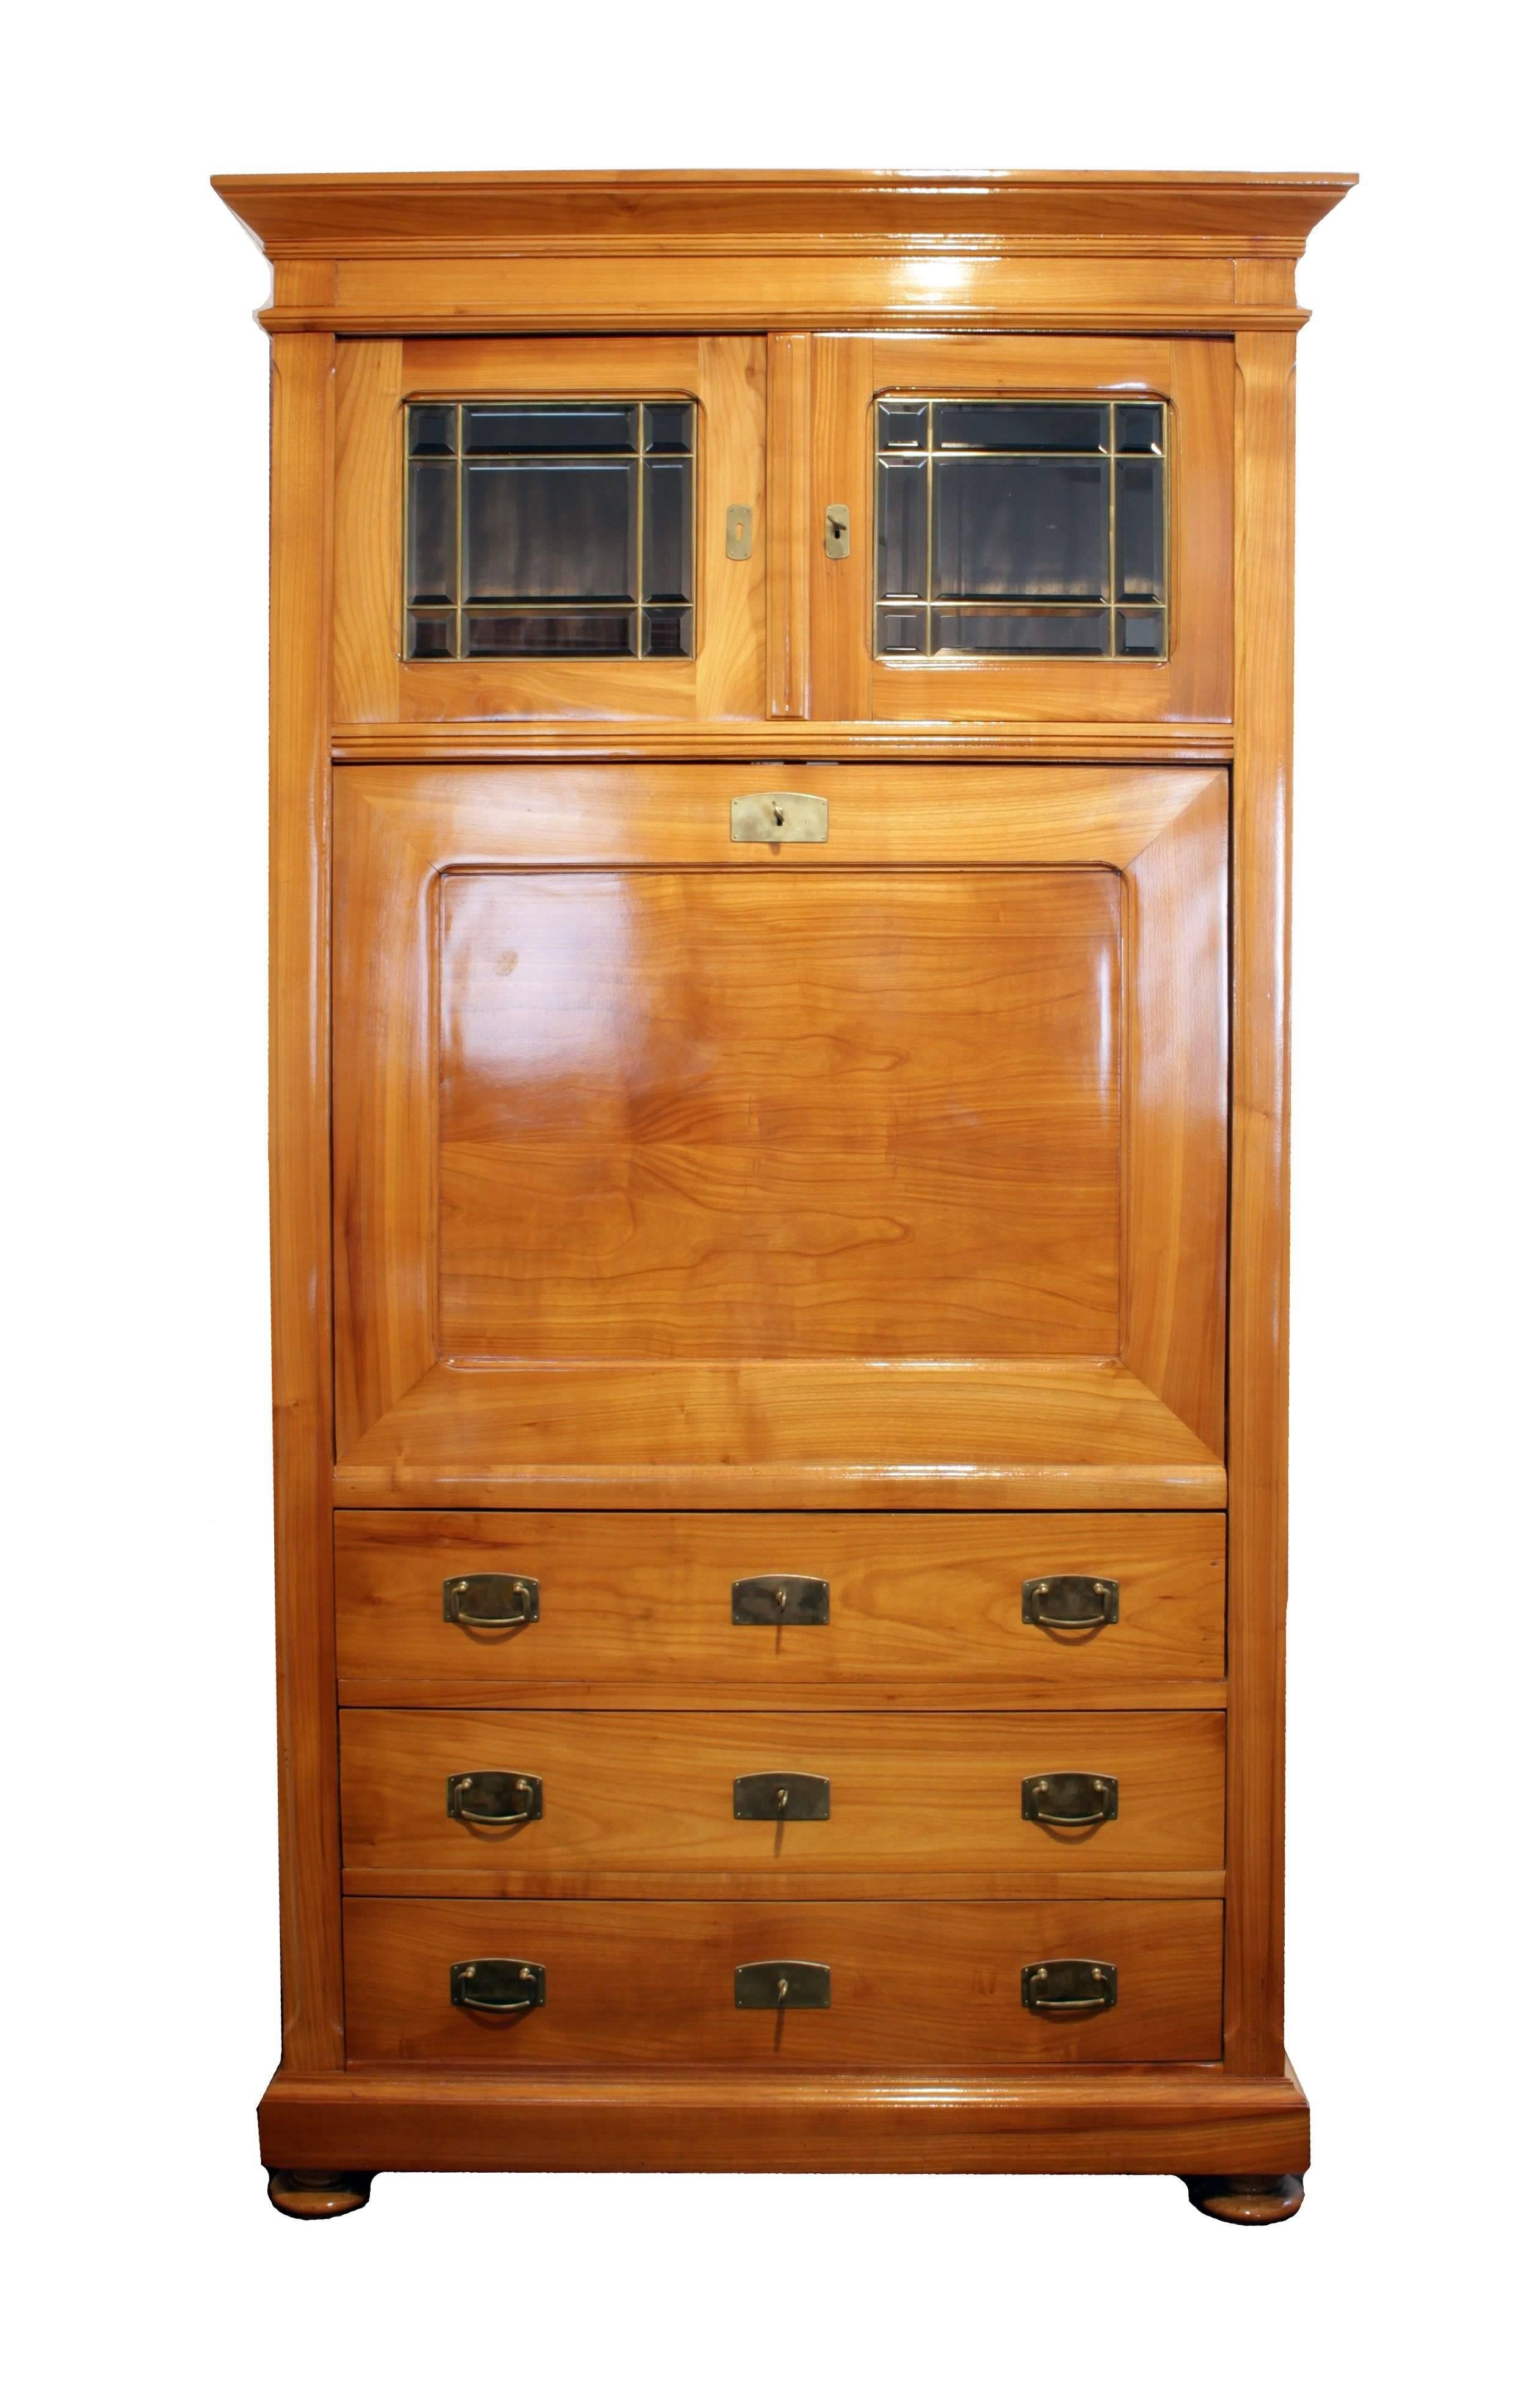 A beautiful Secretaire made of solid cherrywood, from the time of Art Nouveau, circa 1900.
The interior of the middle section was covered with bird’s-eye maple veneer and looks so beautiful. The upper part can be opened via two glass doors. The